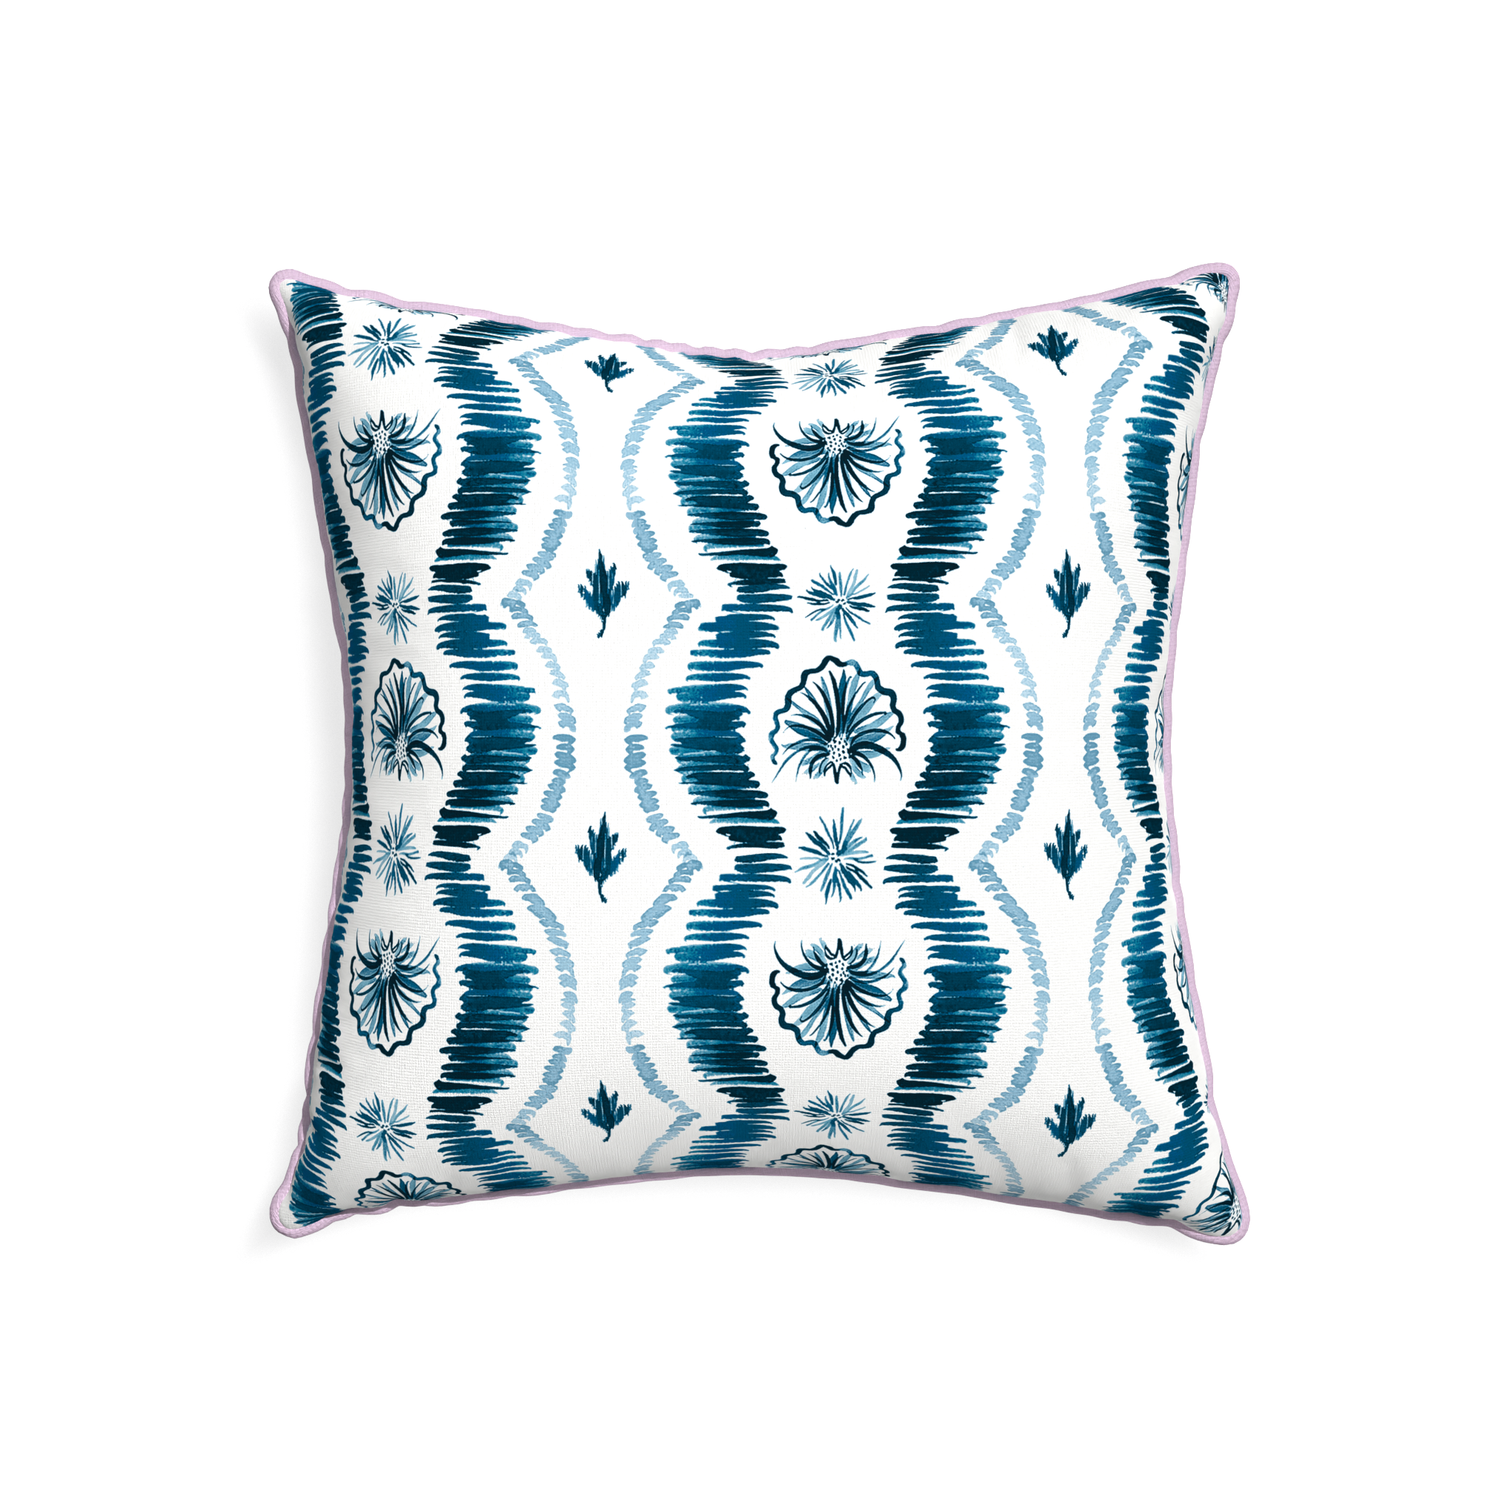 22-square alice custom blue ikatpillow with l piping on white background